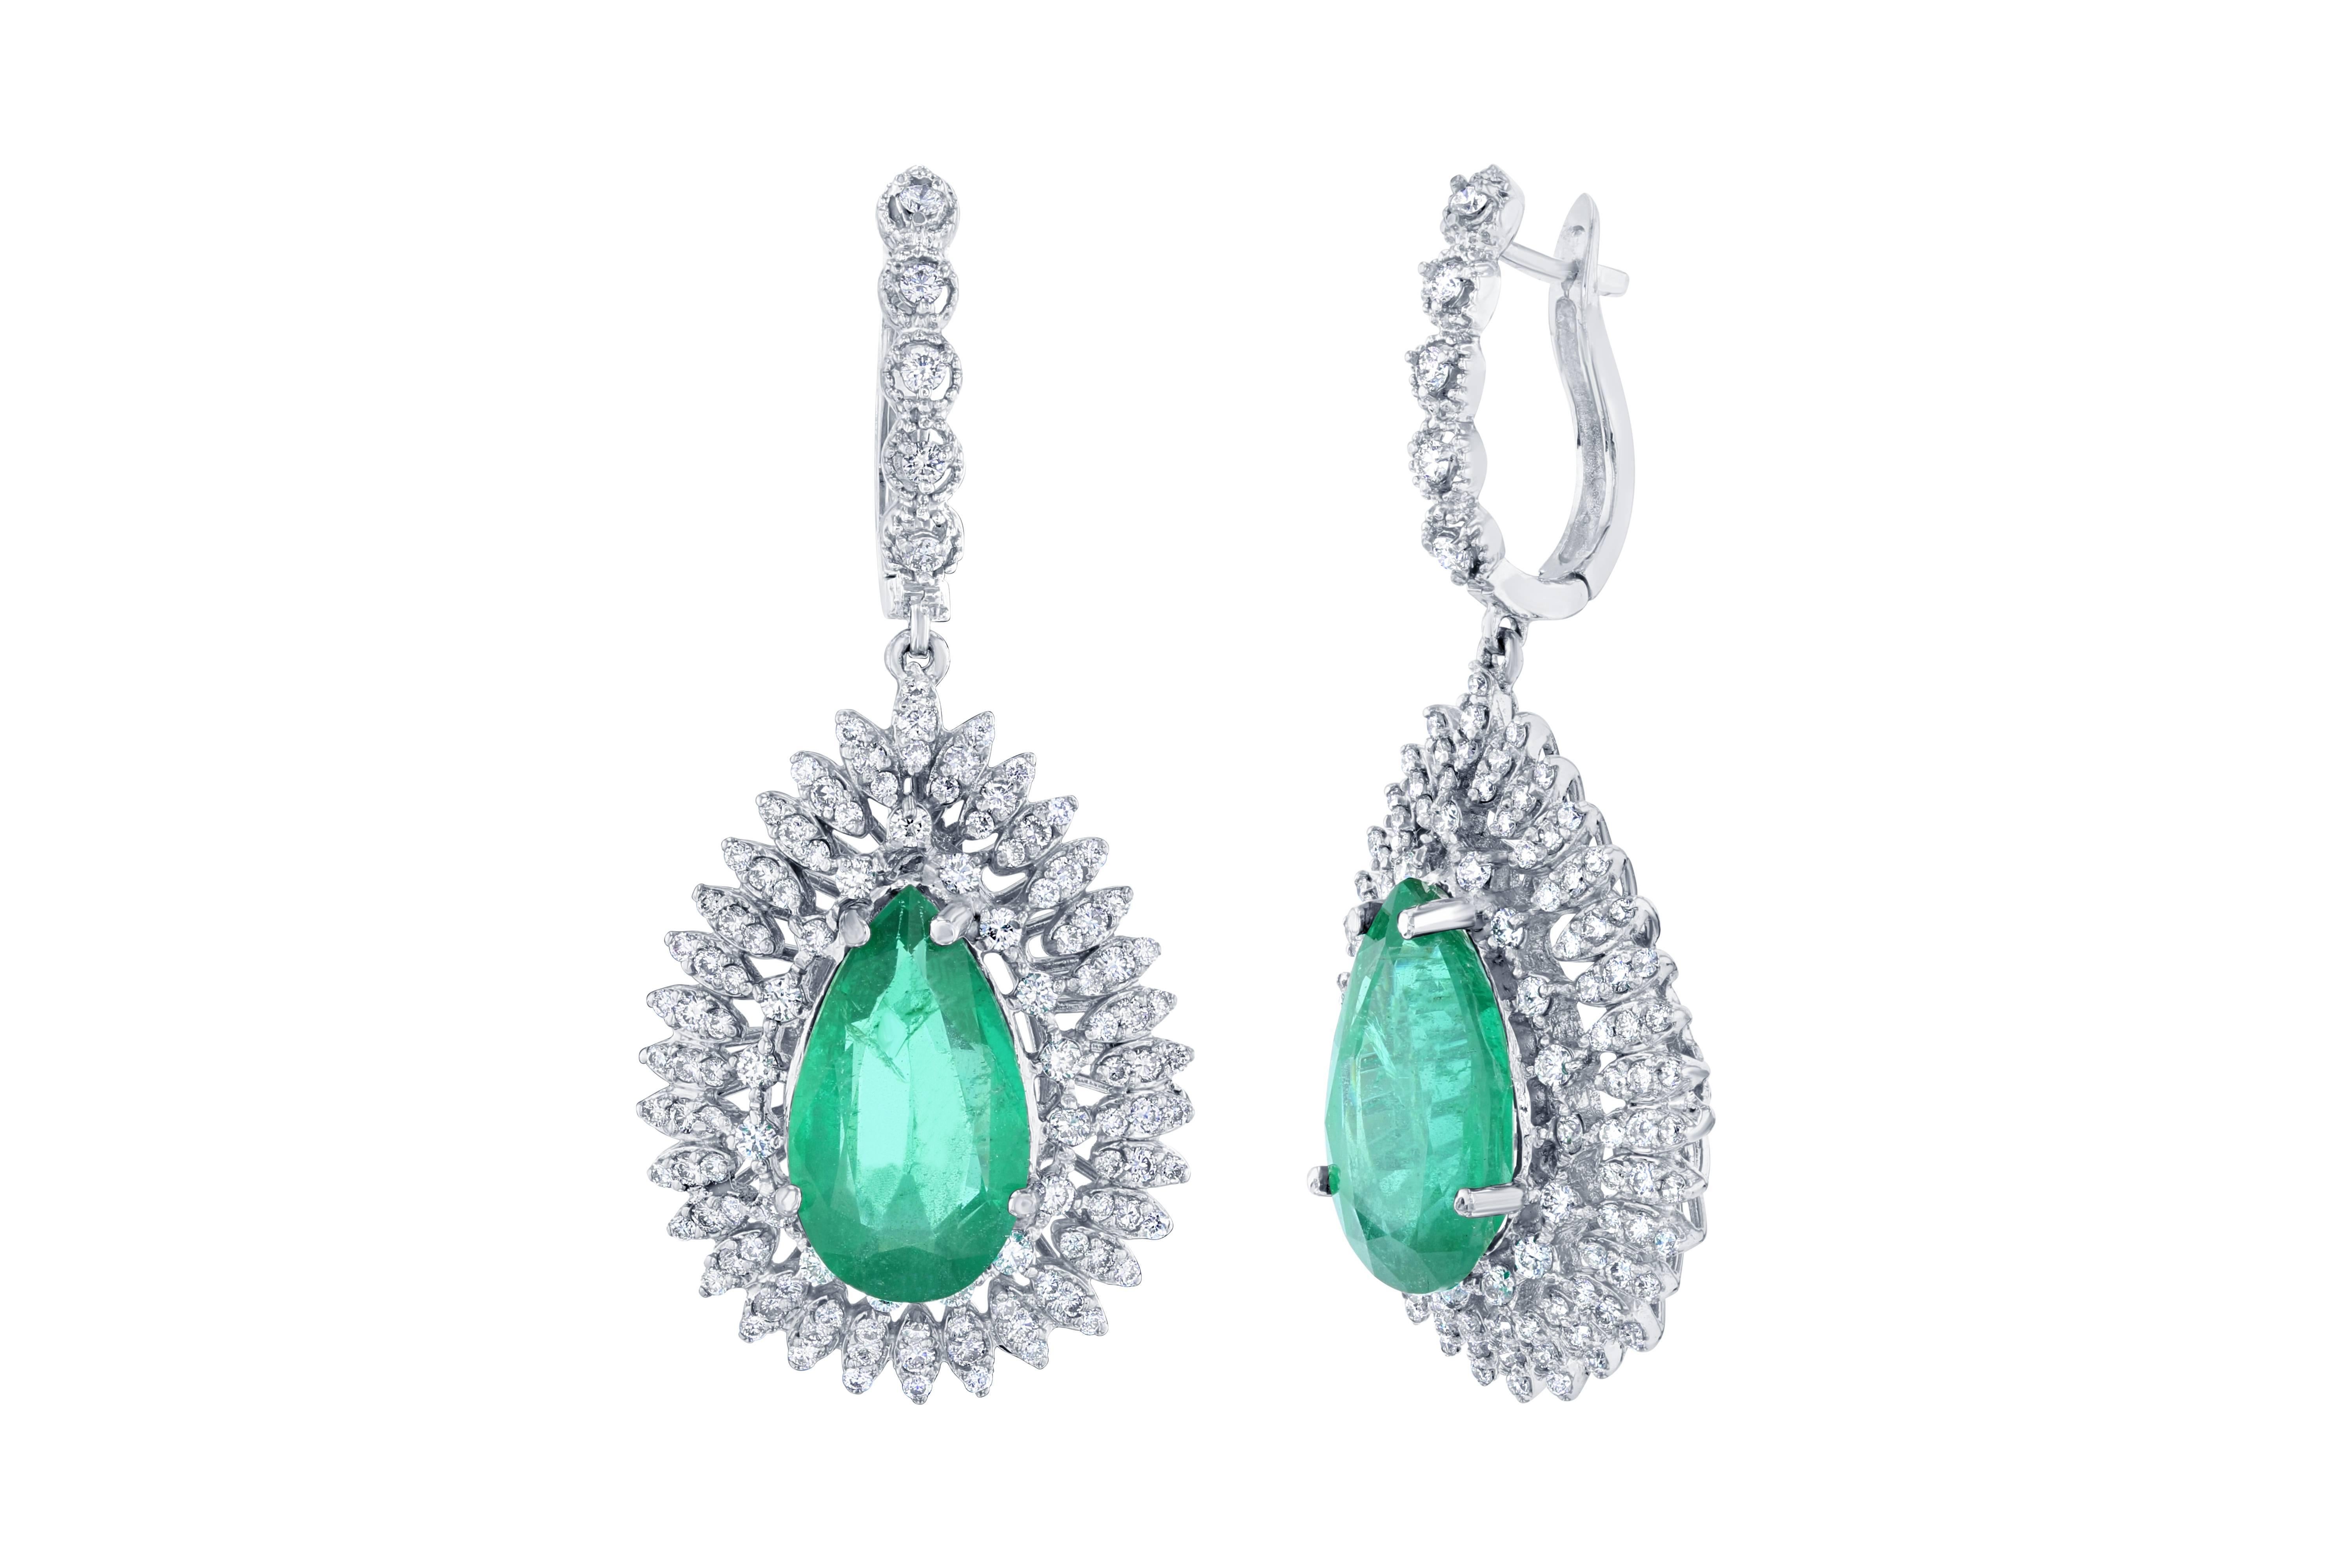 One of a kind masterpiece!!  A gorgeous and rare pair of Pear Cut Emeralds are set in the center of the earrings that weigh 10.74 carats.  The Emeralds are mined in Zambia.  The Emeralds are surrounded by 236 Round Cut Diamonds that weigh a total of